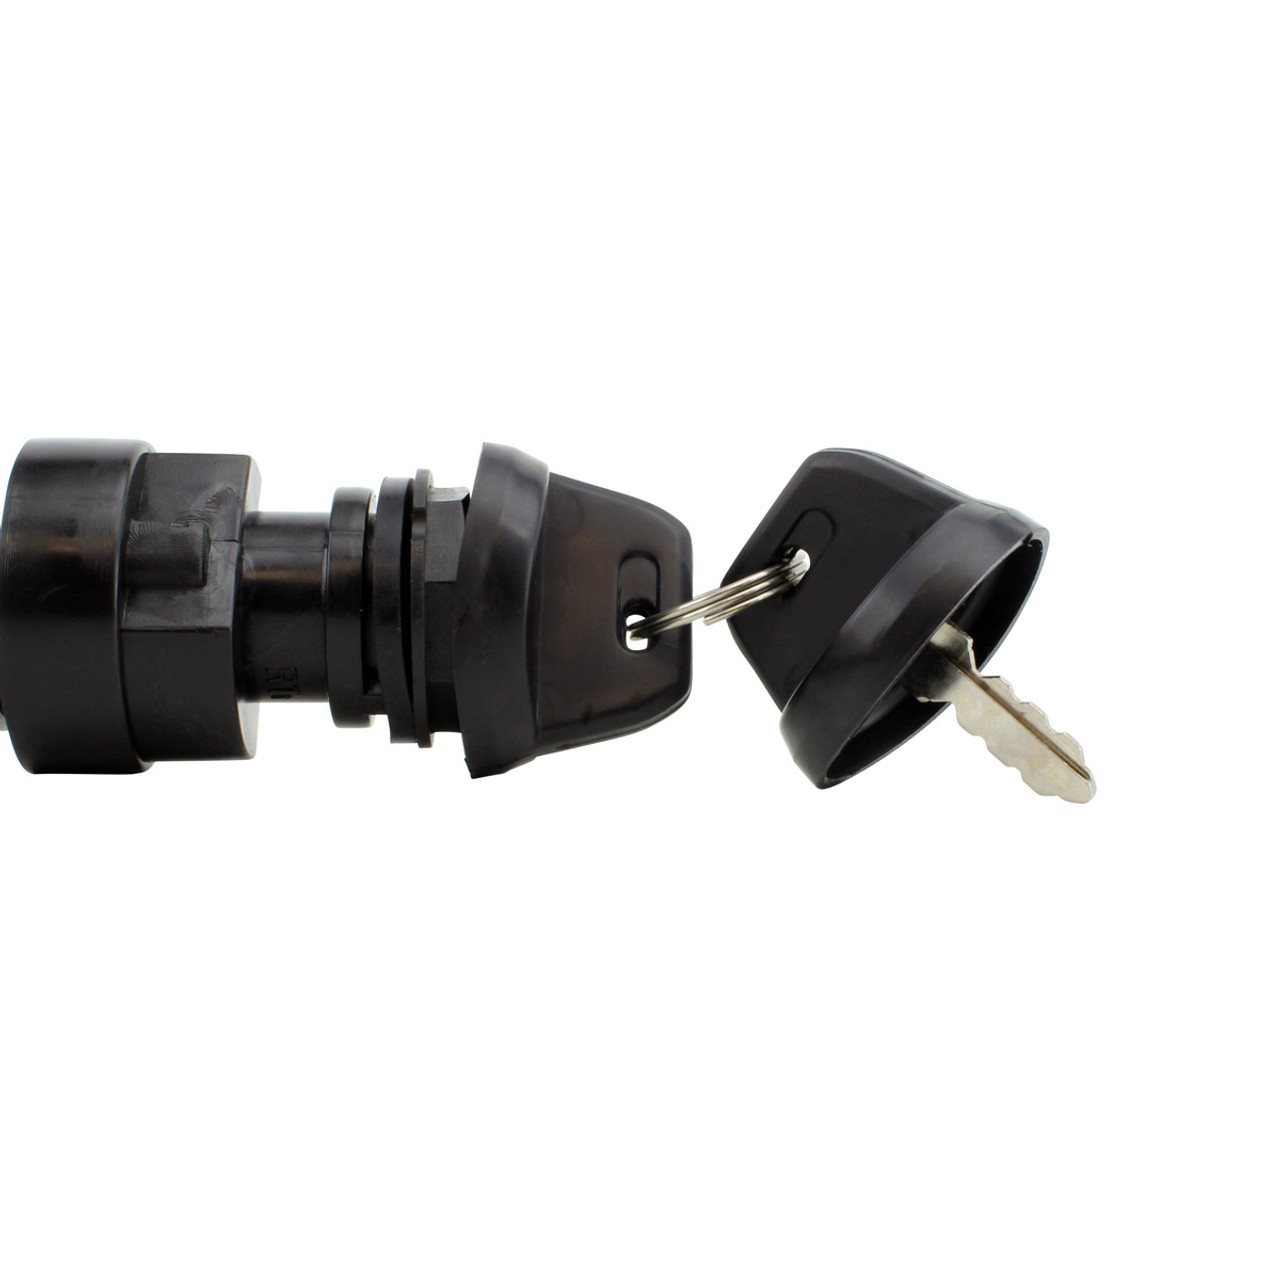 RMSTATOR New Aftermarket Yamaha 2-Position Ignition Key Switch, RM05007